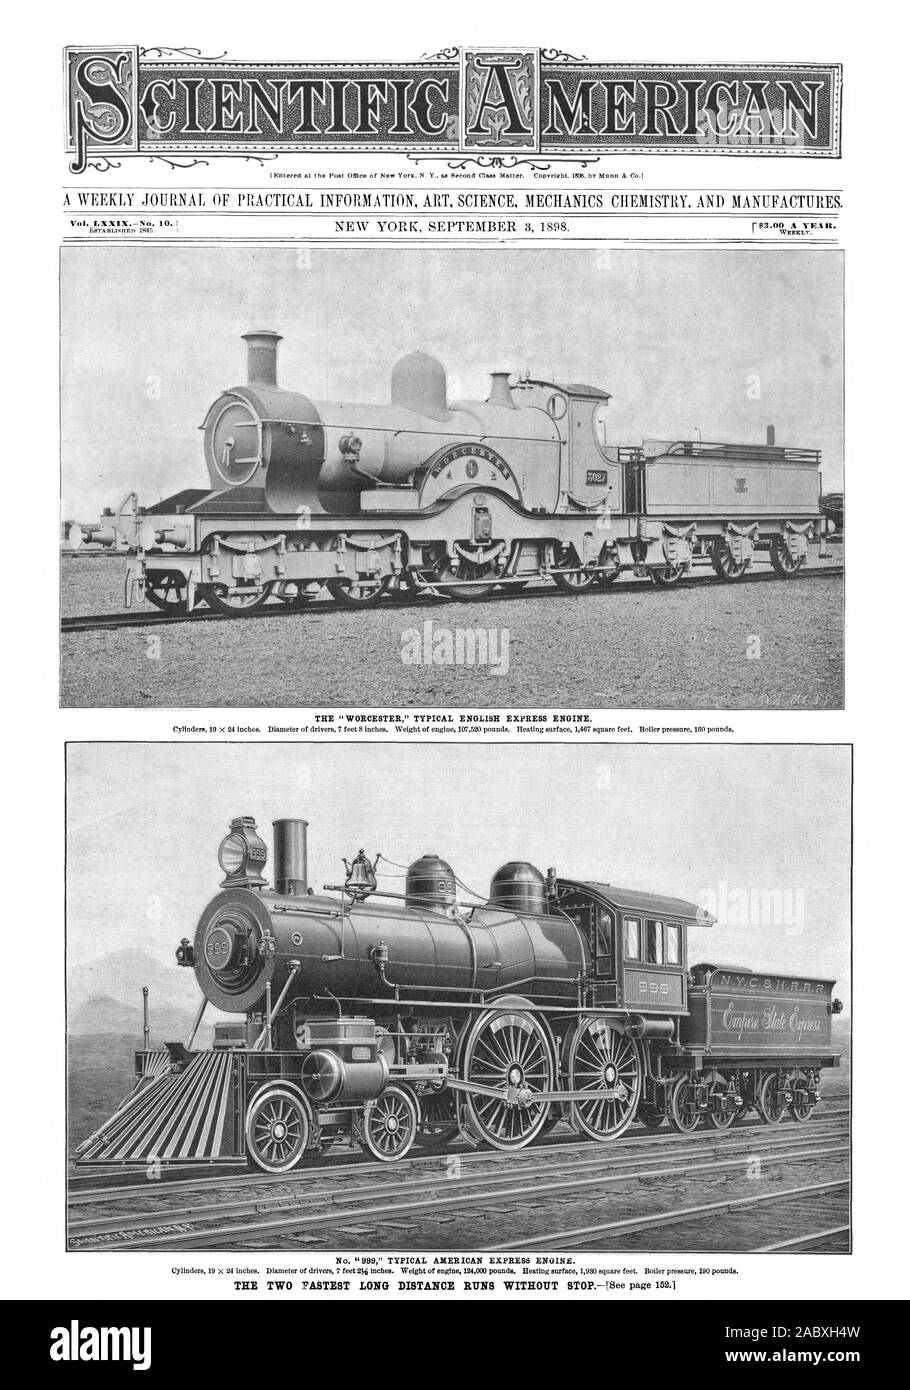 A WEEKLY JOURNAL OF PRACTICAL INFORMATION ART SCIENCE MECHANICS CHEMISTRY. AND MANUFACTURES. THE 'WORCESTER' TYPICAL ENGLISH EXPRESS ENGINE. No. '999' TYPICAL AXERICAN EXPRESS ENGINE., scientific american, 1898-09-03 Stock Photo